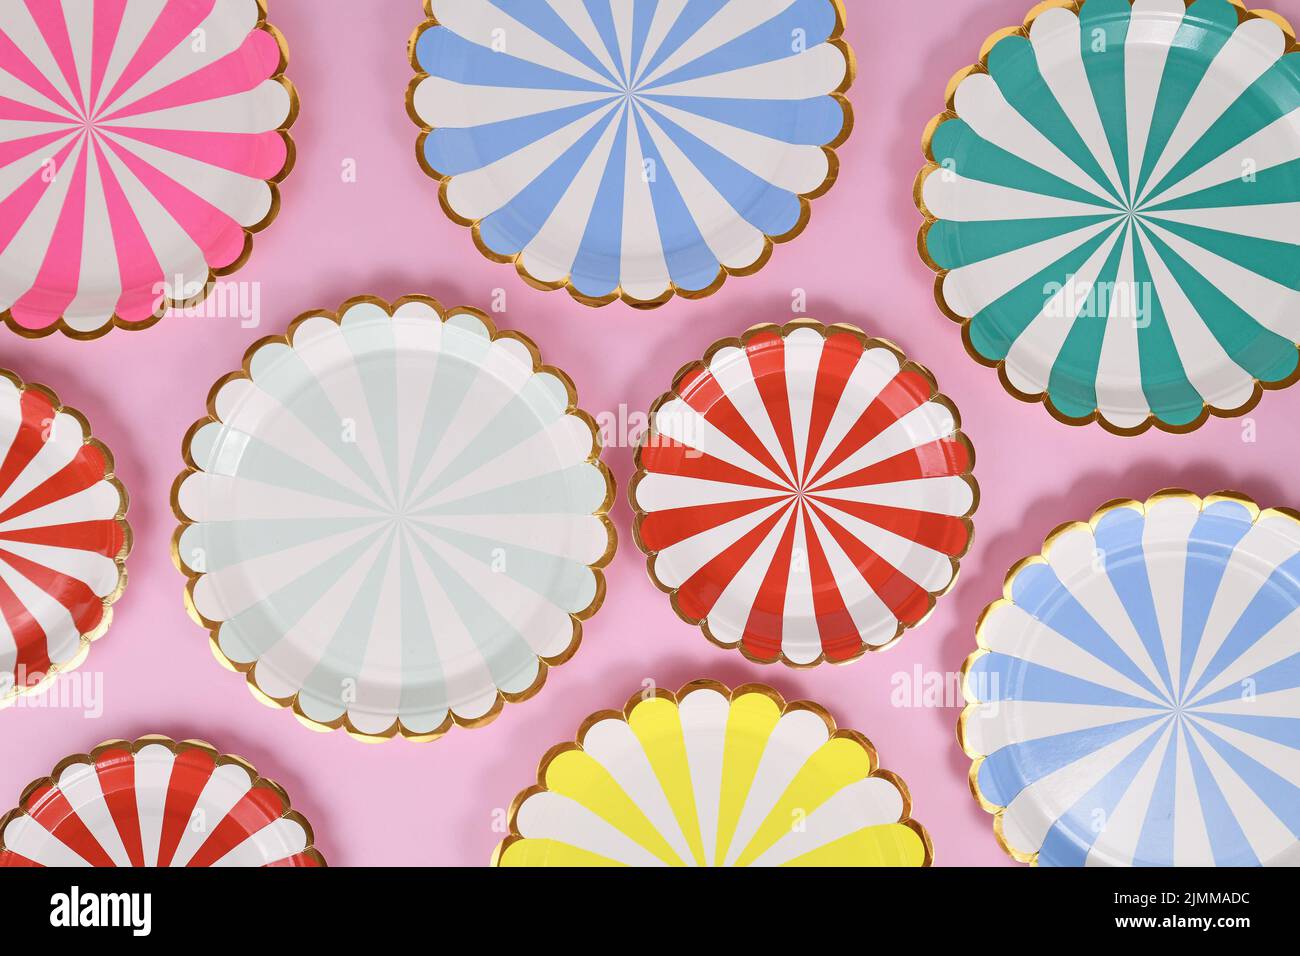 Colorful striped paper party plates on pink background Stock Photo